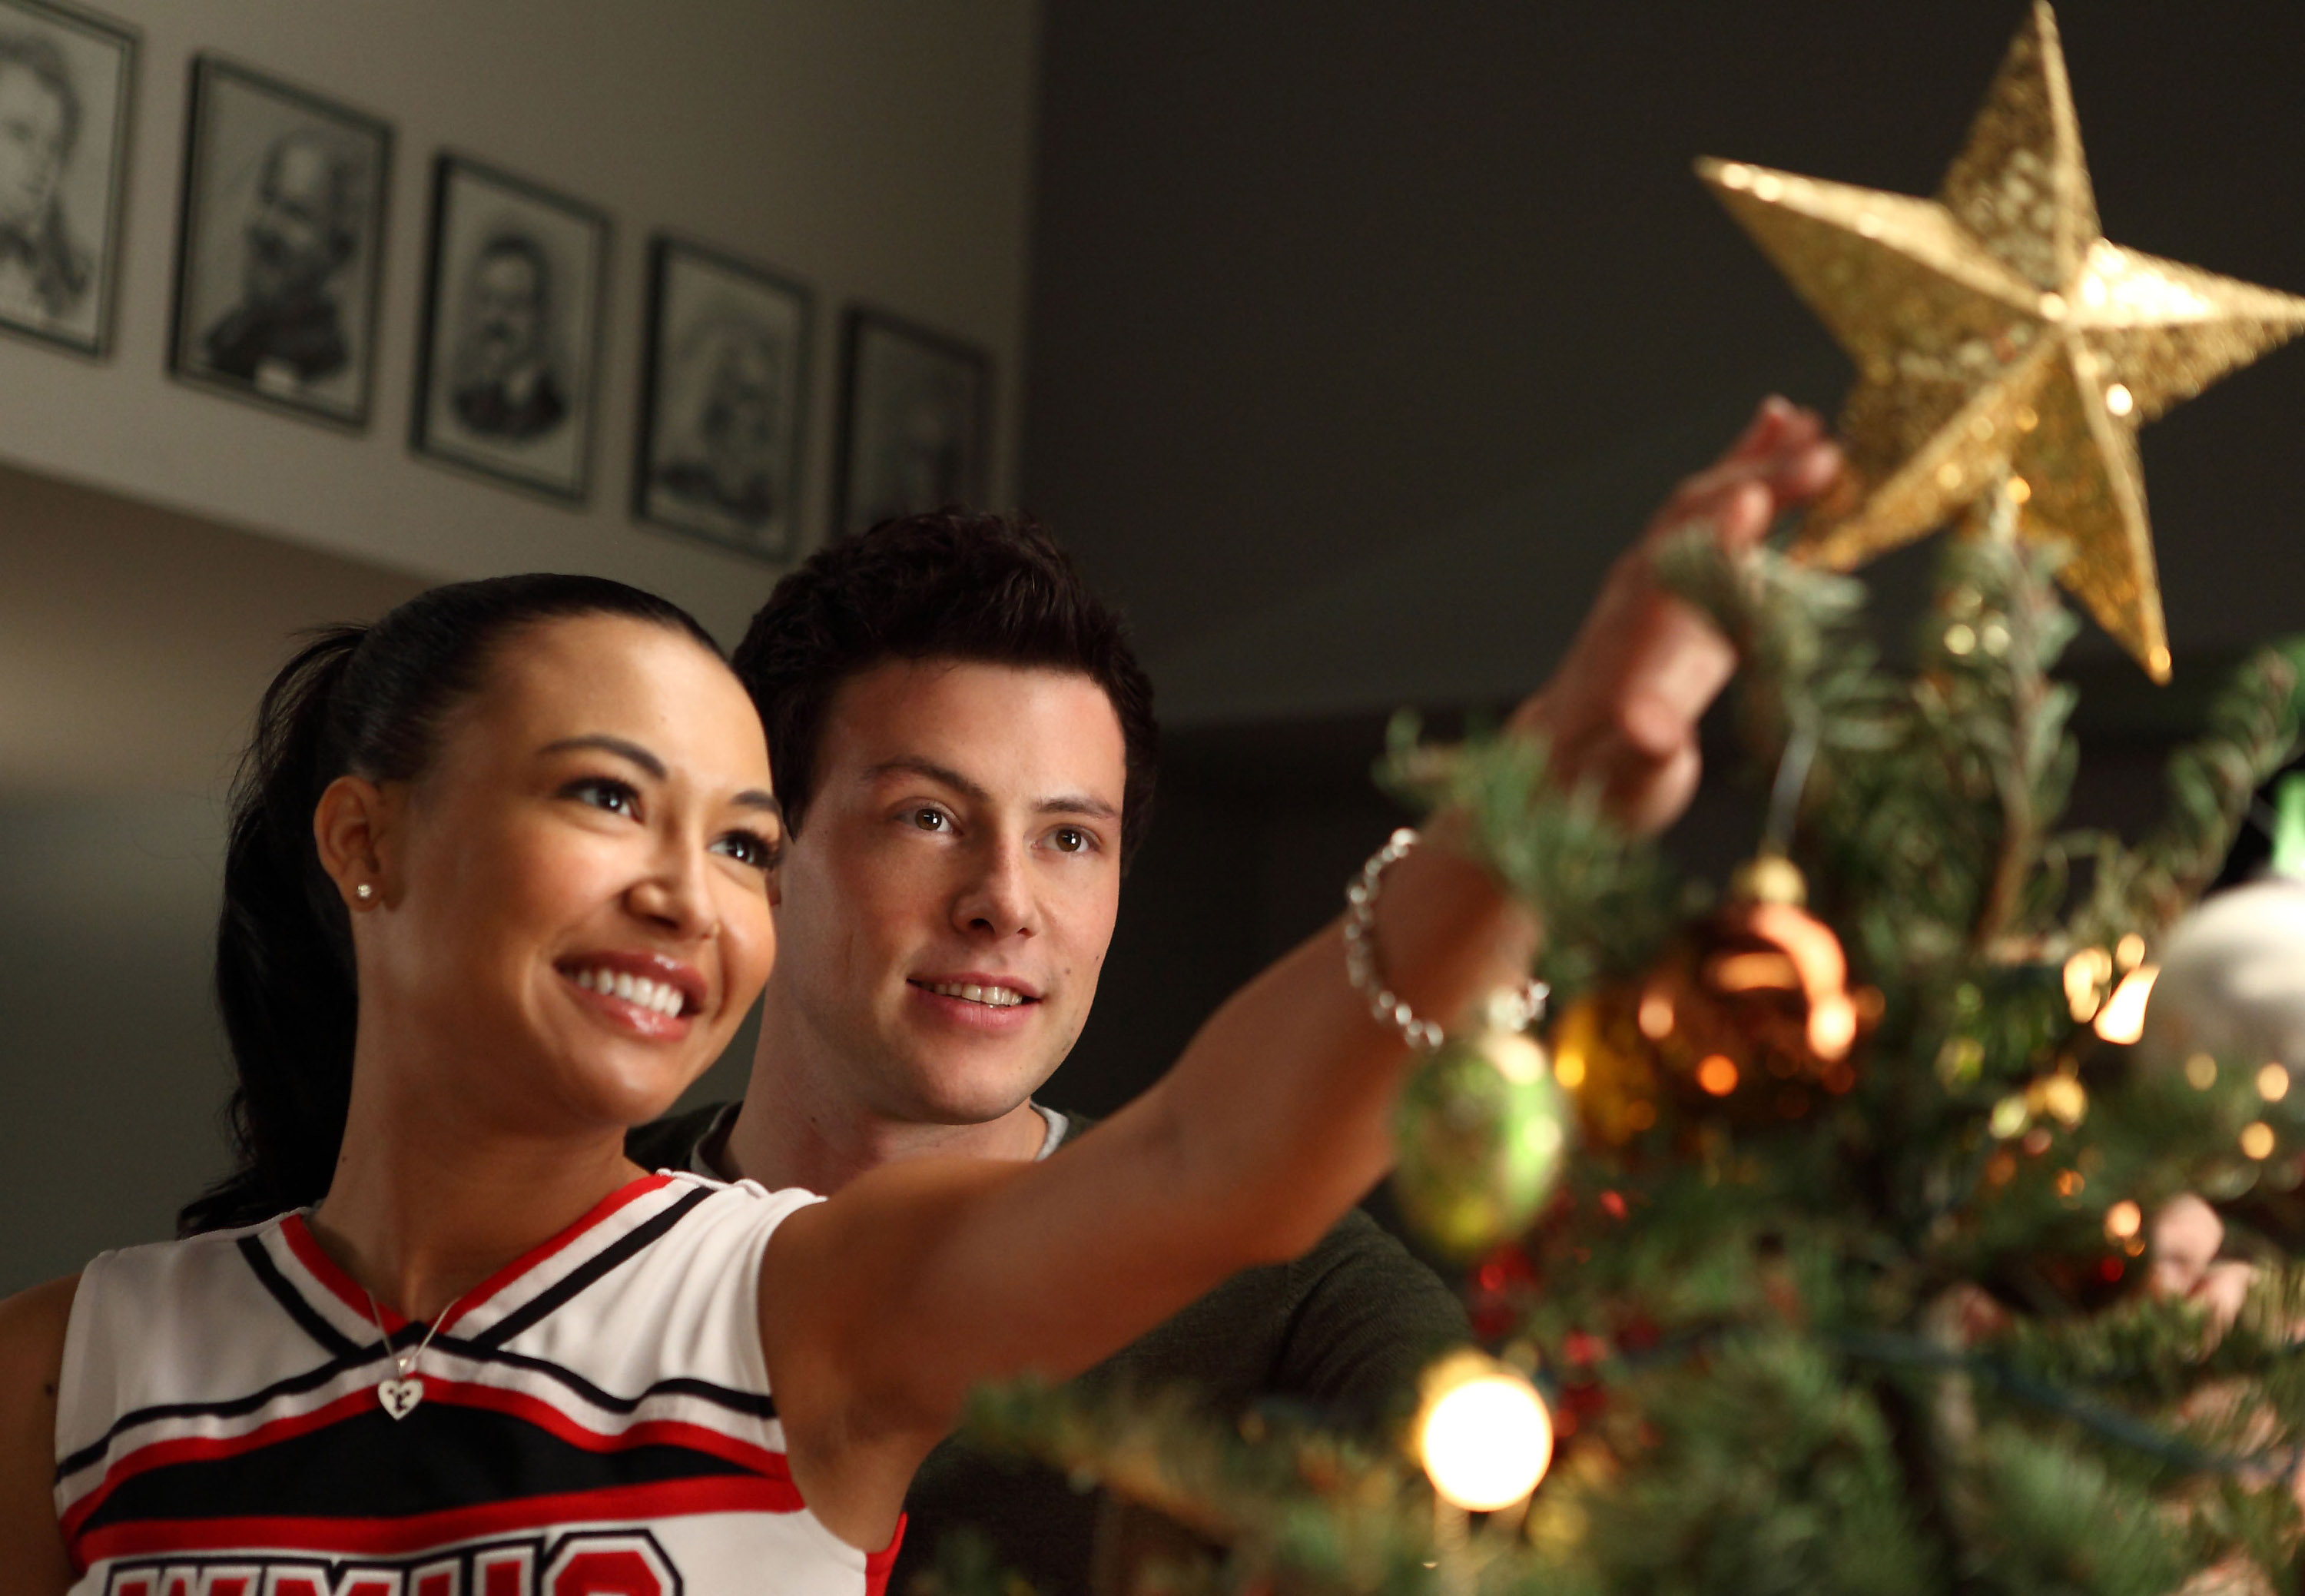 Naya Rivera and Cory Monteith | FOX Image Collection via Getty Images